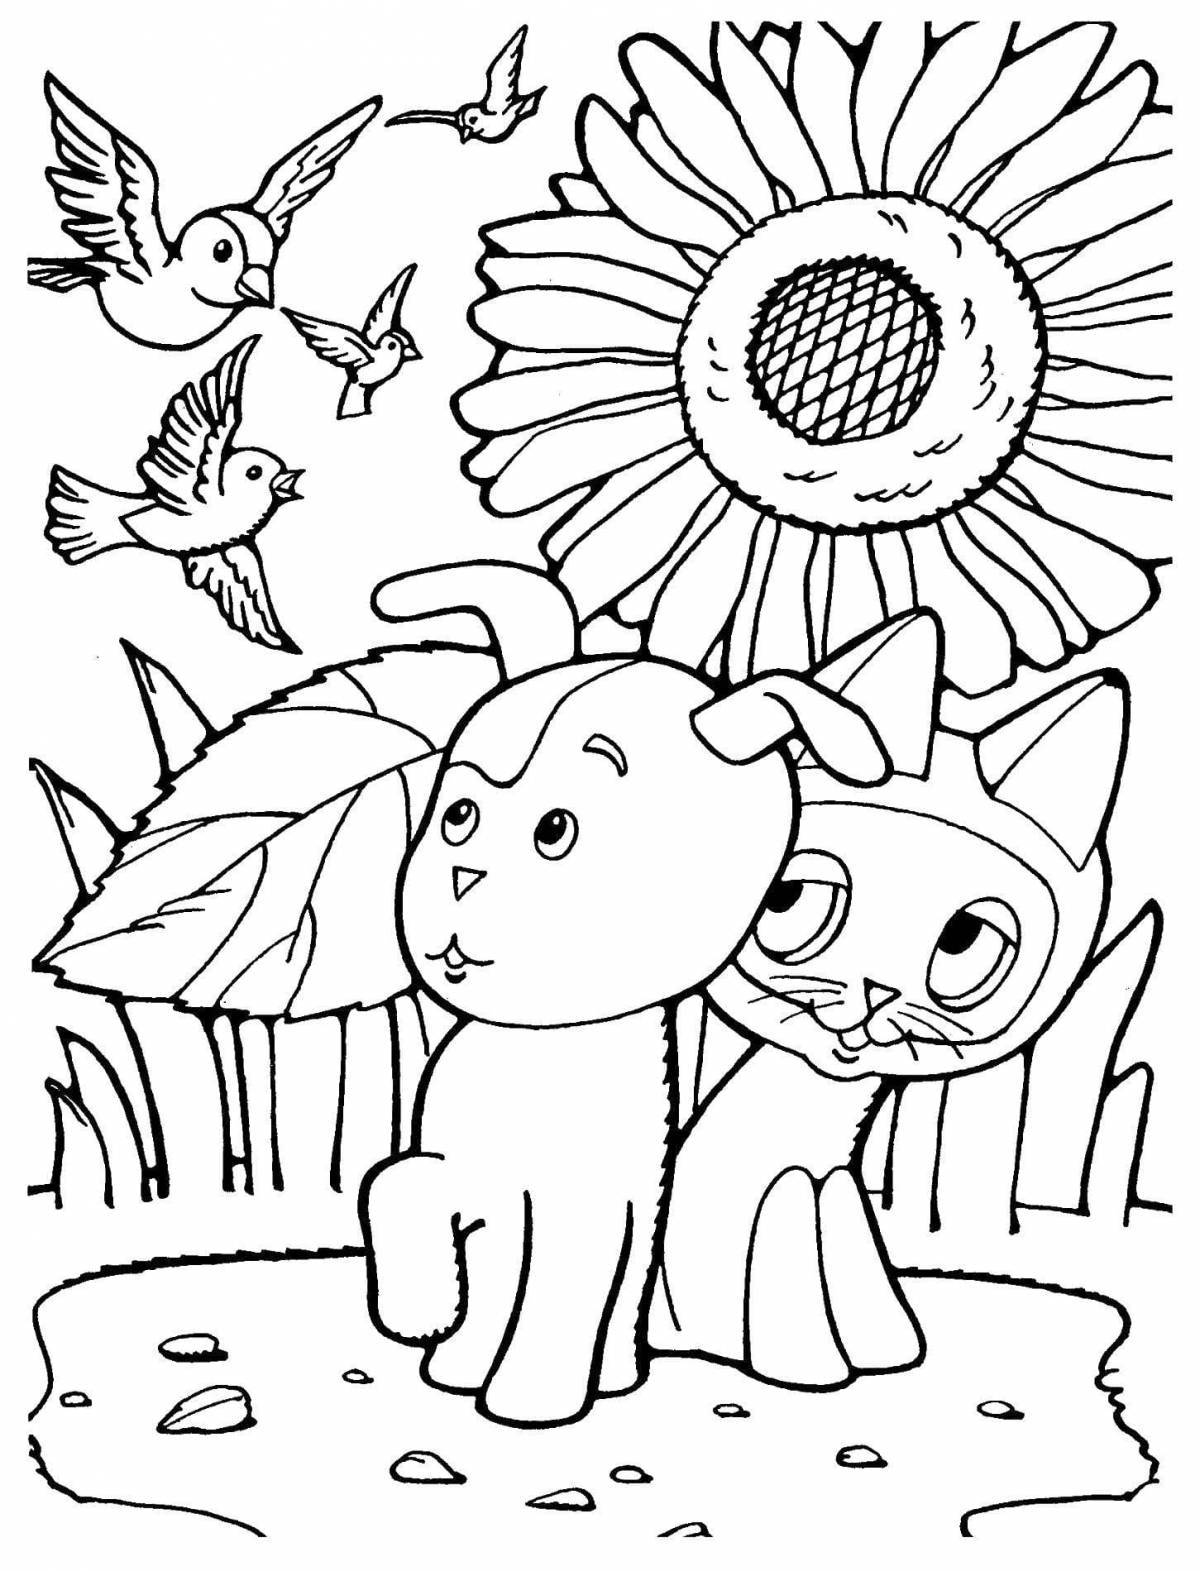 Coloring page violent kitten